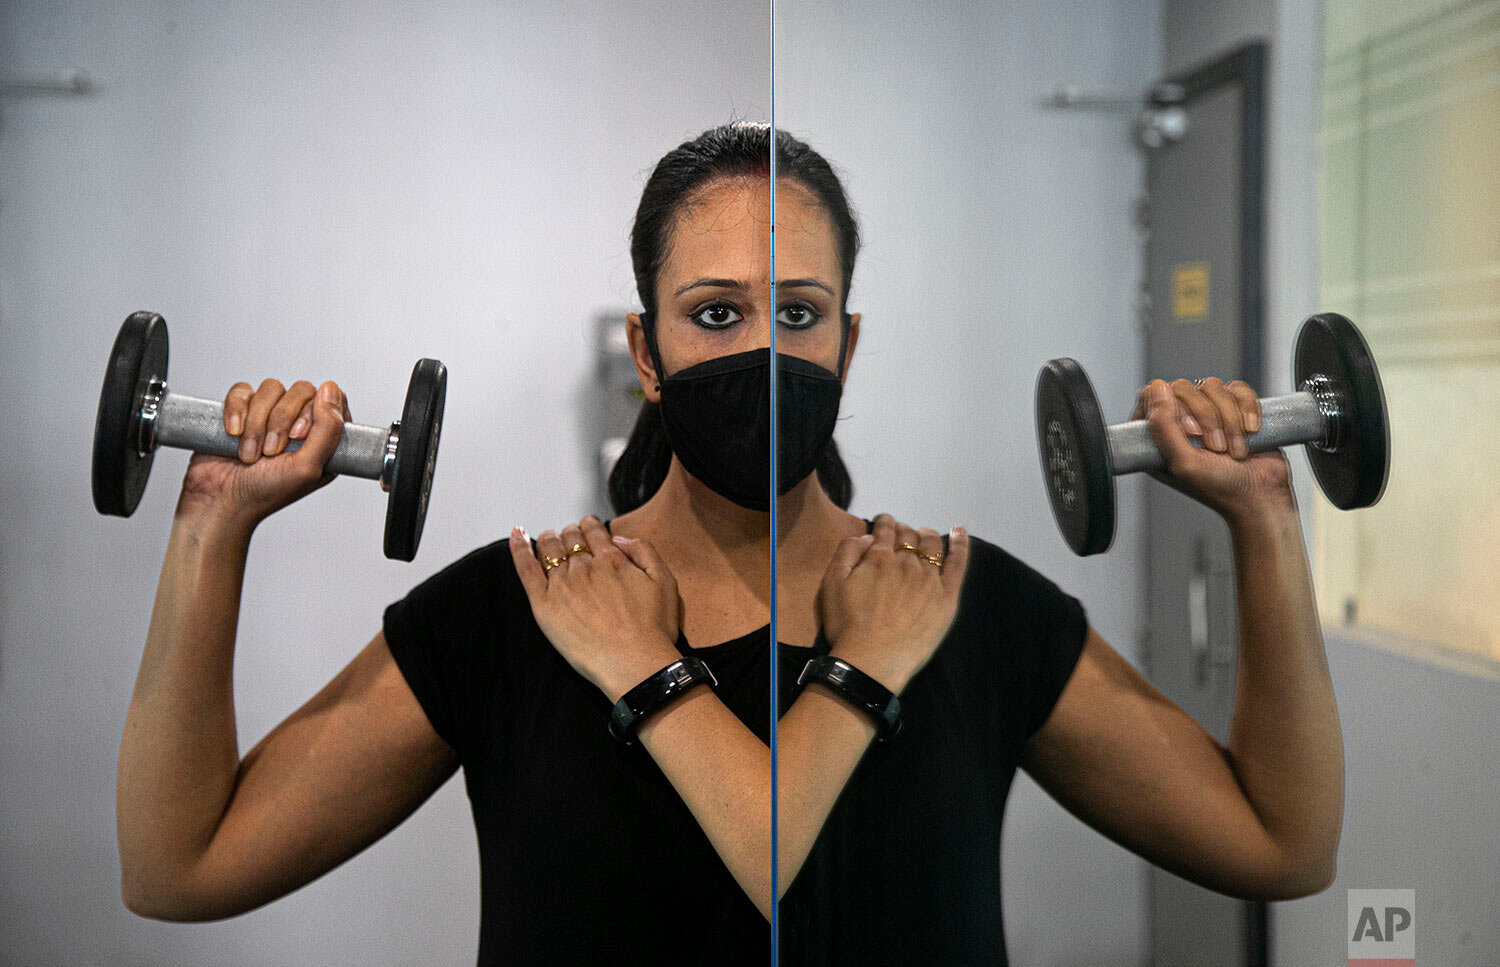  An Indian woman working out is reflected on a mirror of a gym that reopened after lockdown in Gauhati, India, Wednesday, Aug. 5, 2020. (AP Photo/Anupam Nath) 